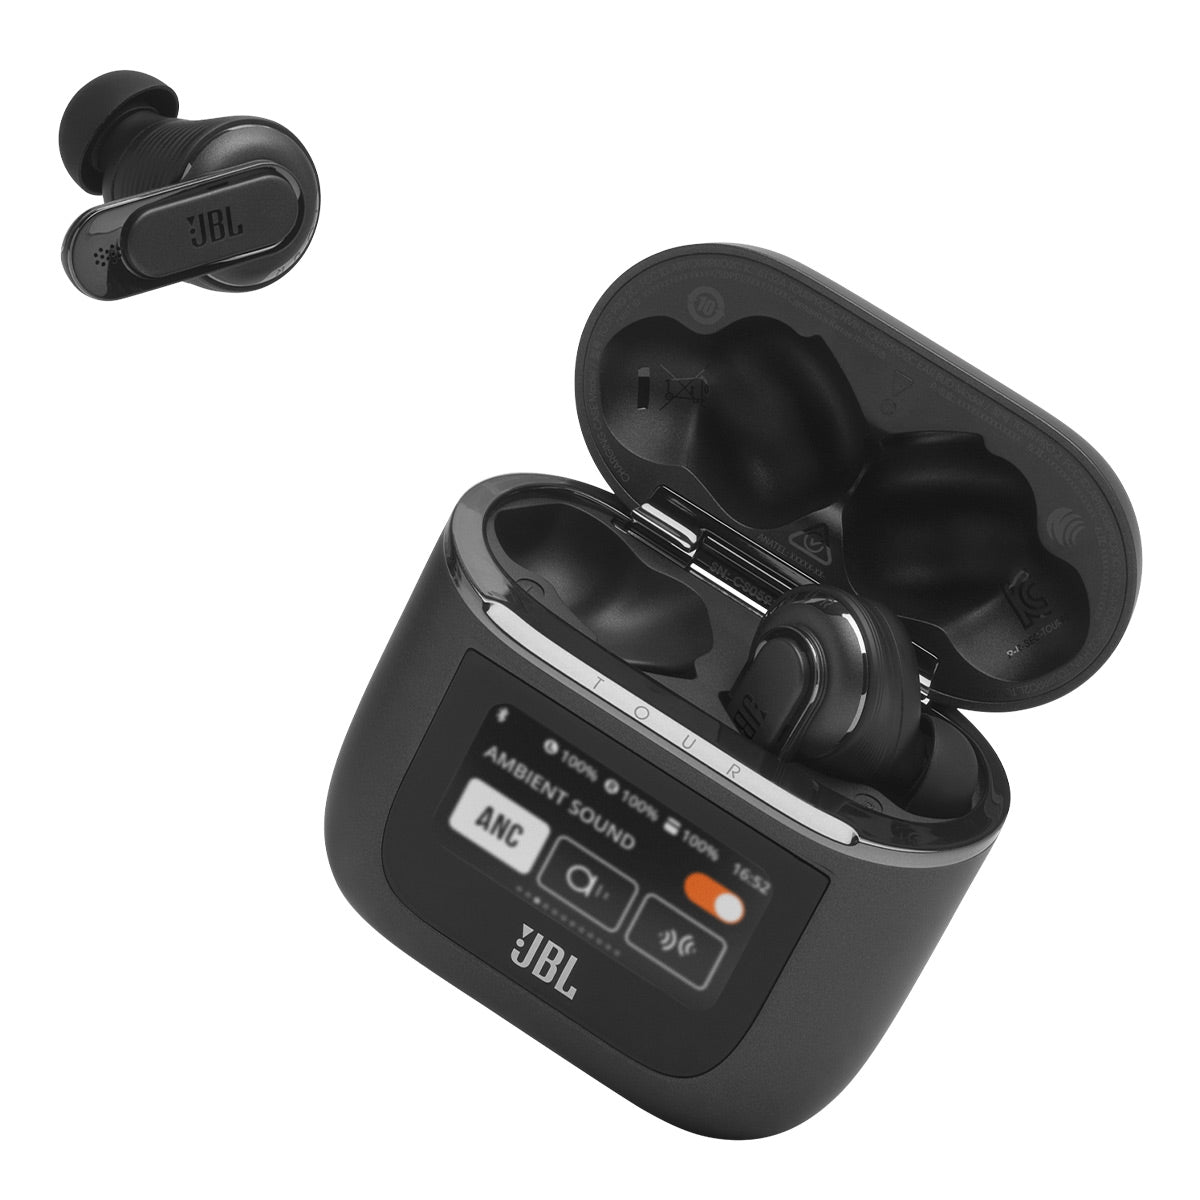 JBL's Tour Pro 2 Earbuds Are the First to Come With a Touchscreen